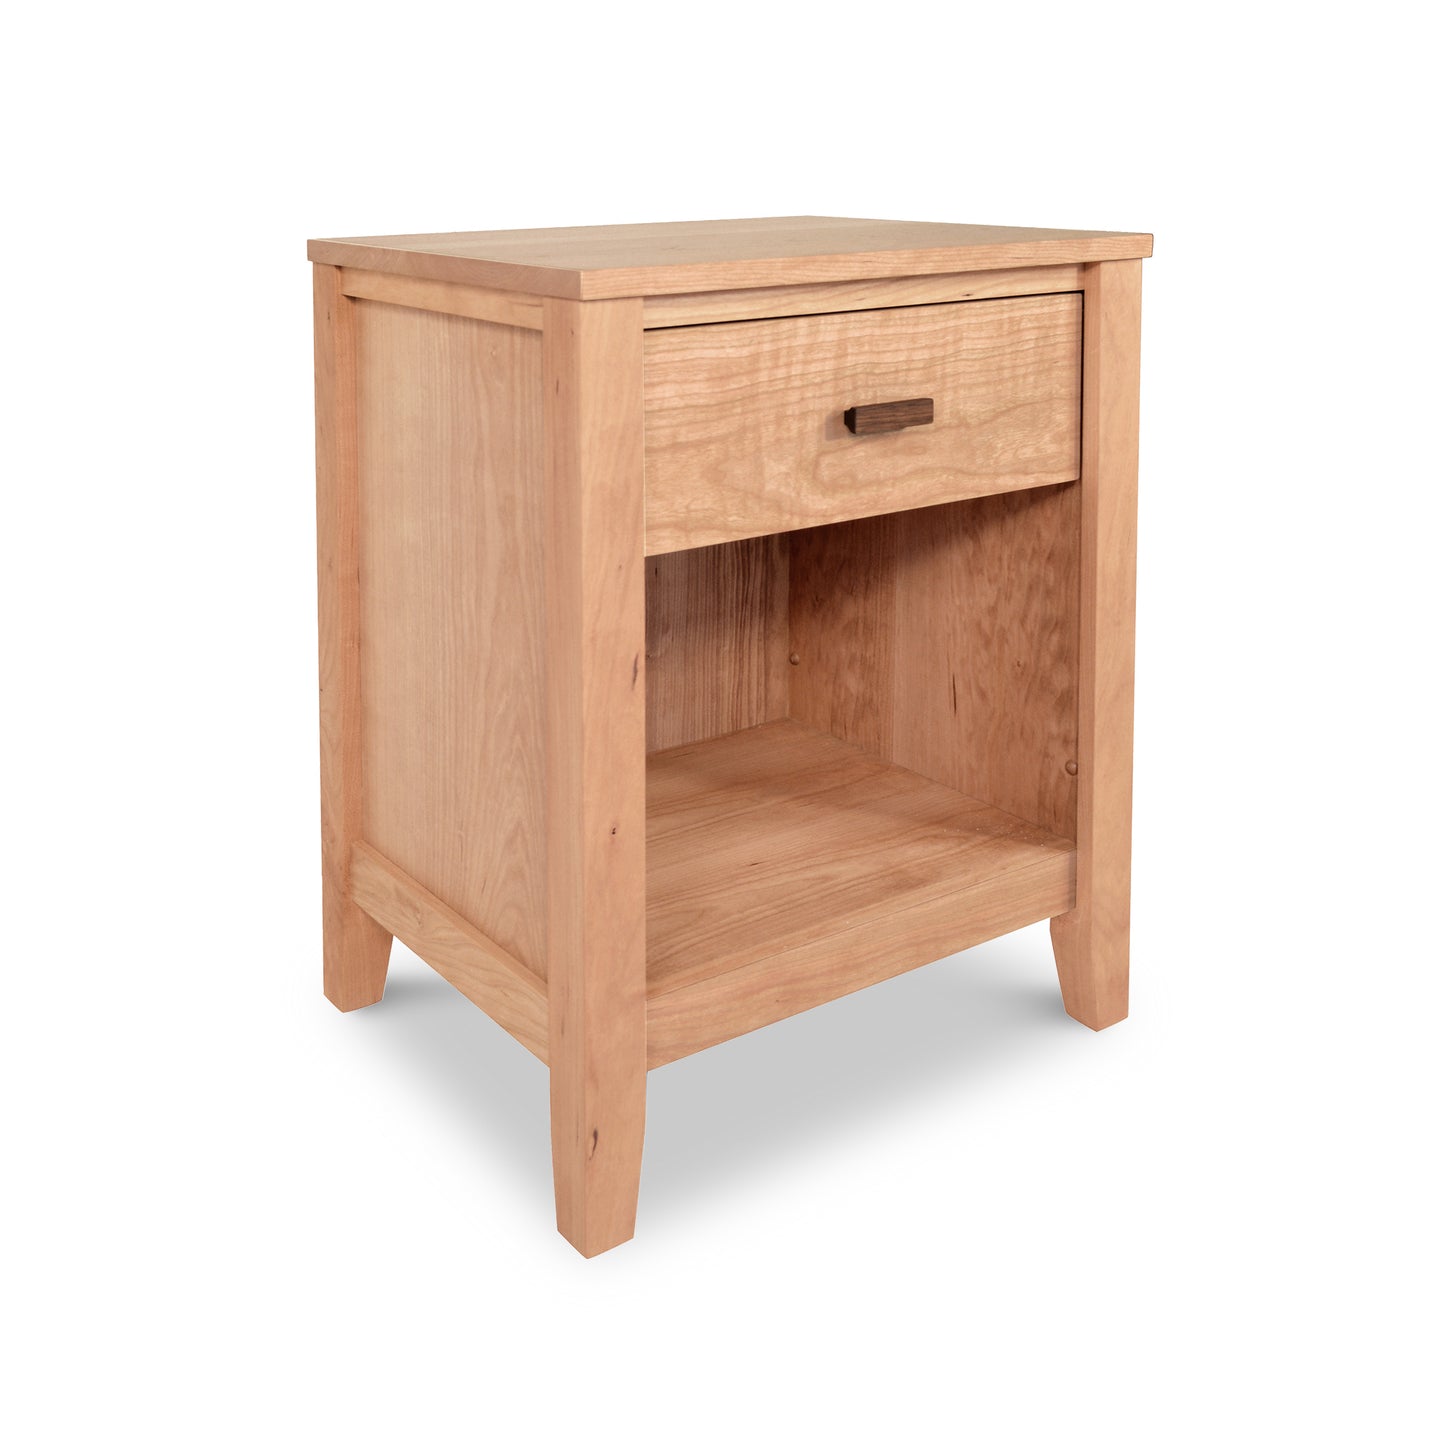 A Maple Corner Woodworks Andover Modern 1-Drawer Enclosed Shelf Nightstand featuring a single drawer and an open shelf below, isolated on a white background.